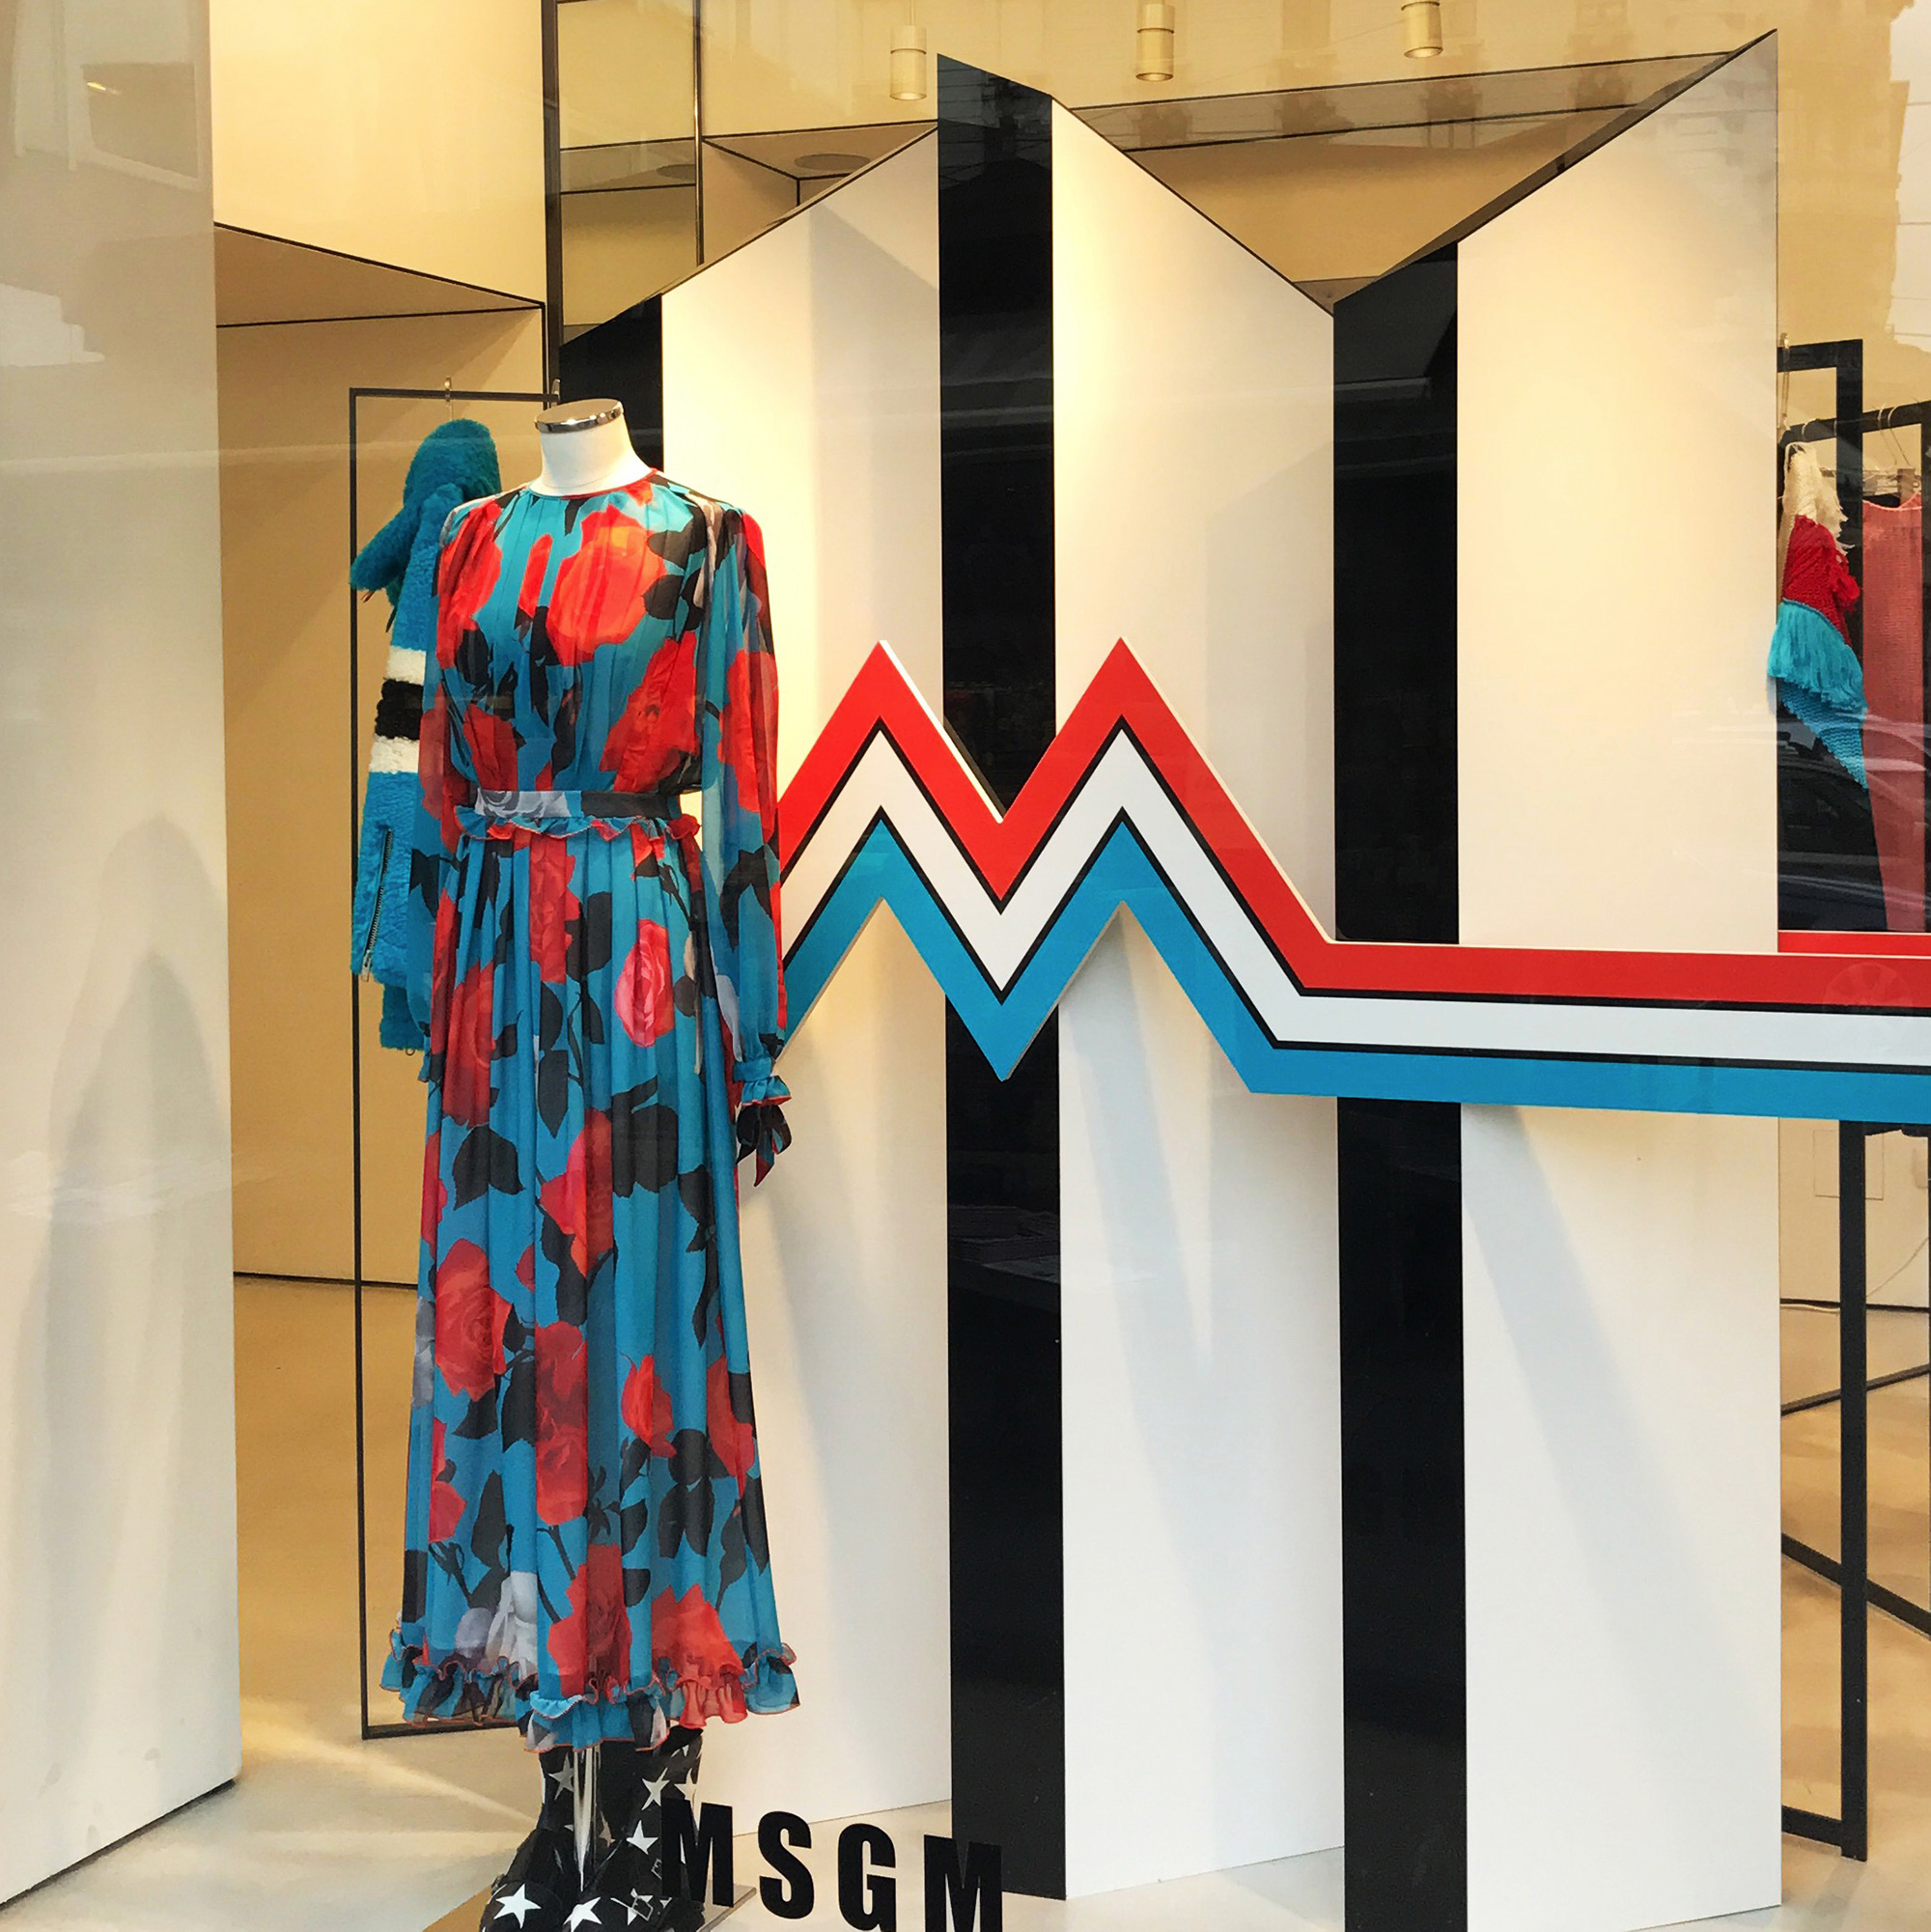 MSGM Twin Peaks M window design black and white structure, red flowers dress